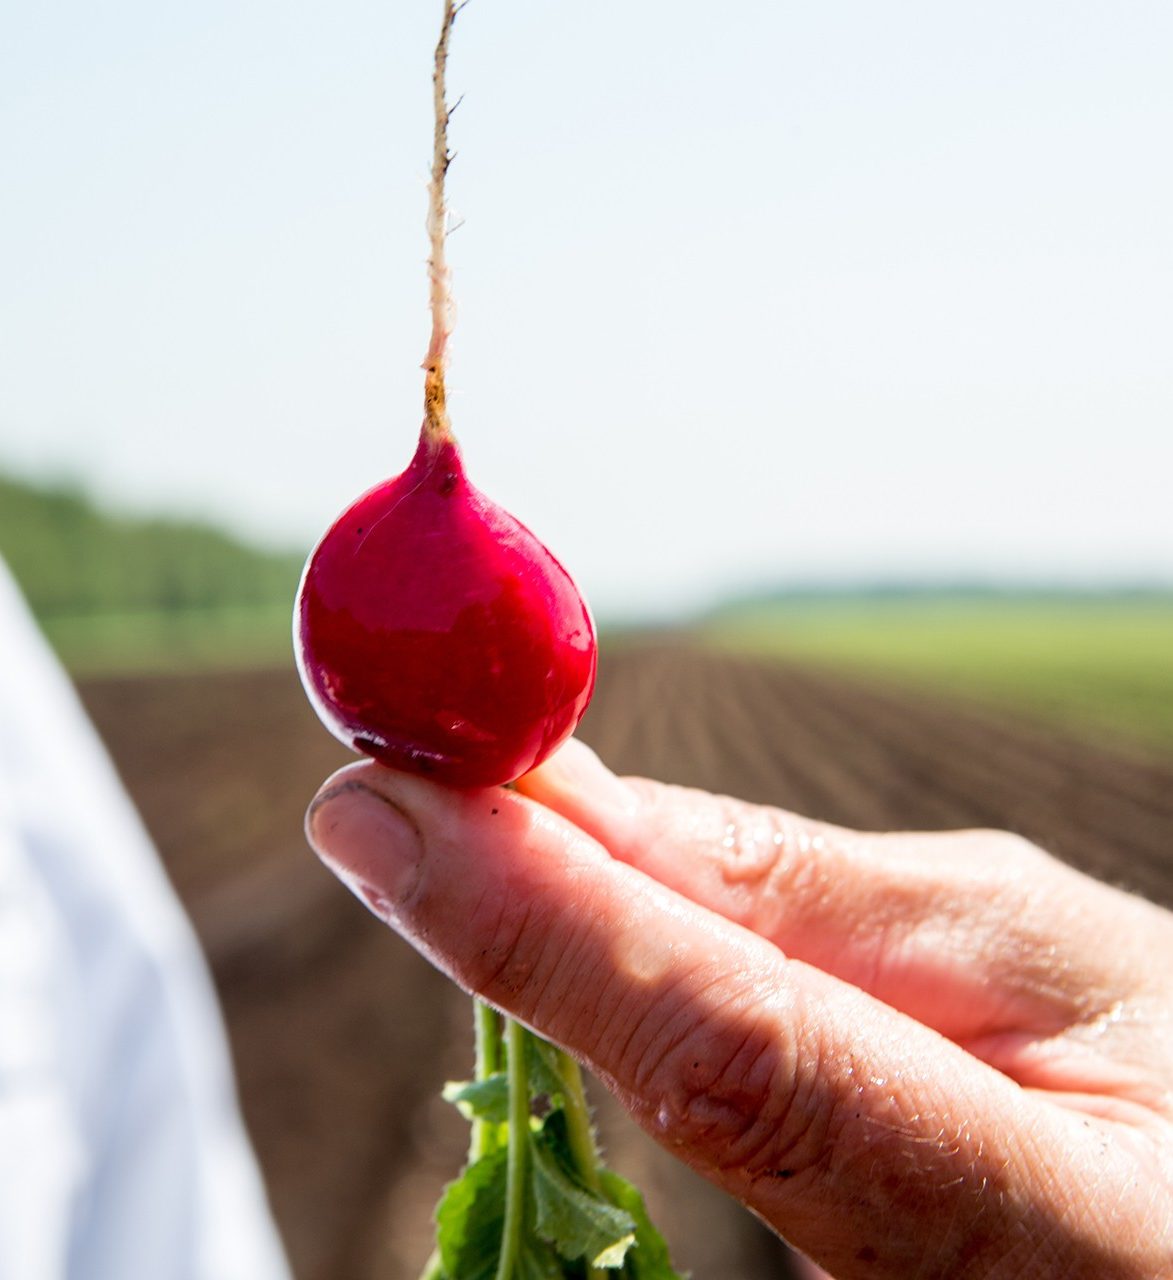 close-up of fingers holding a radish harvested from a field